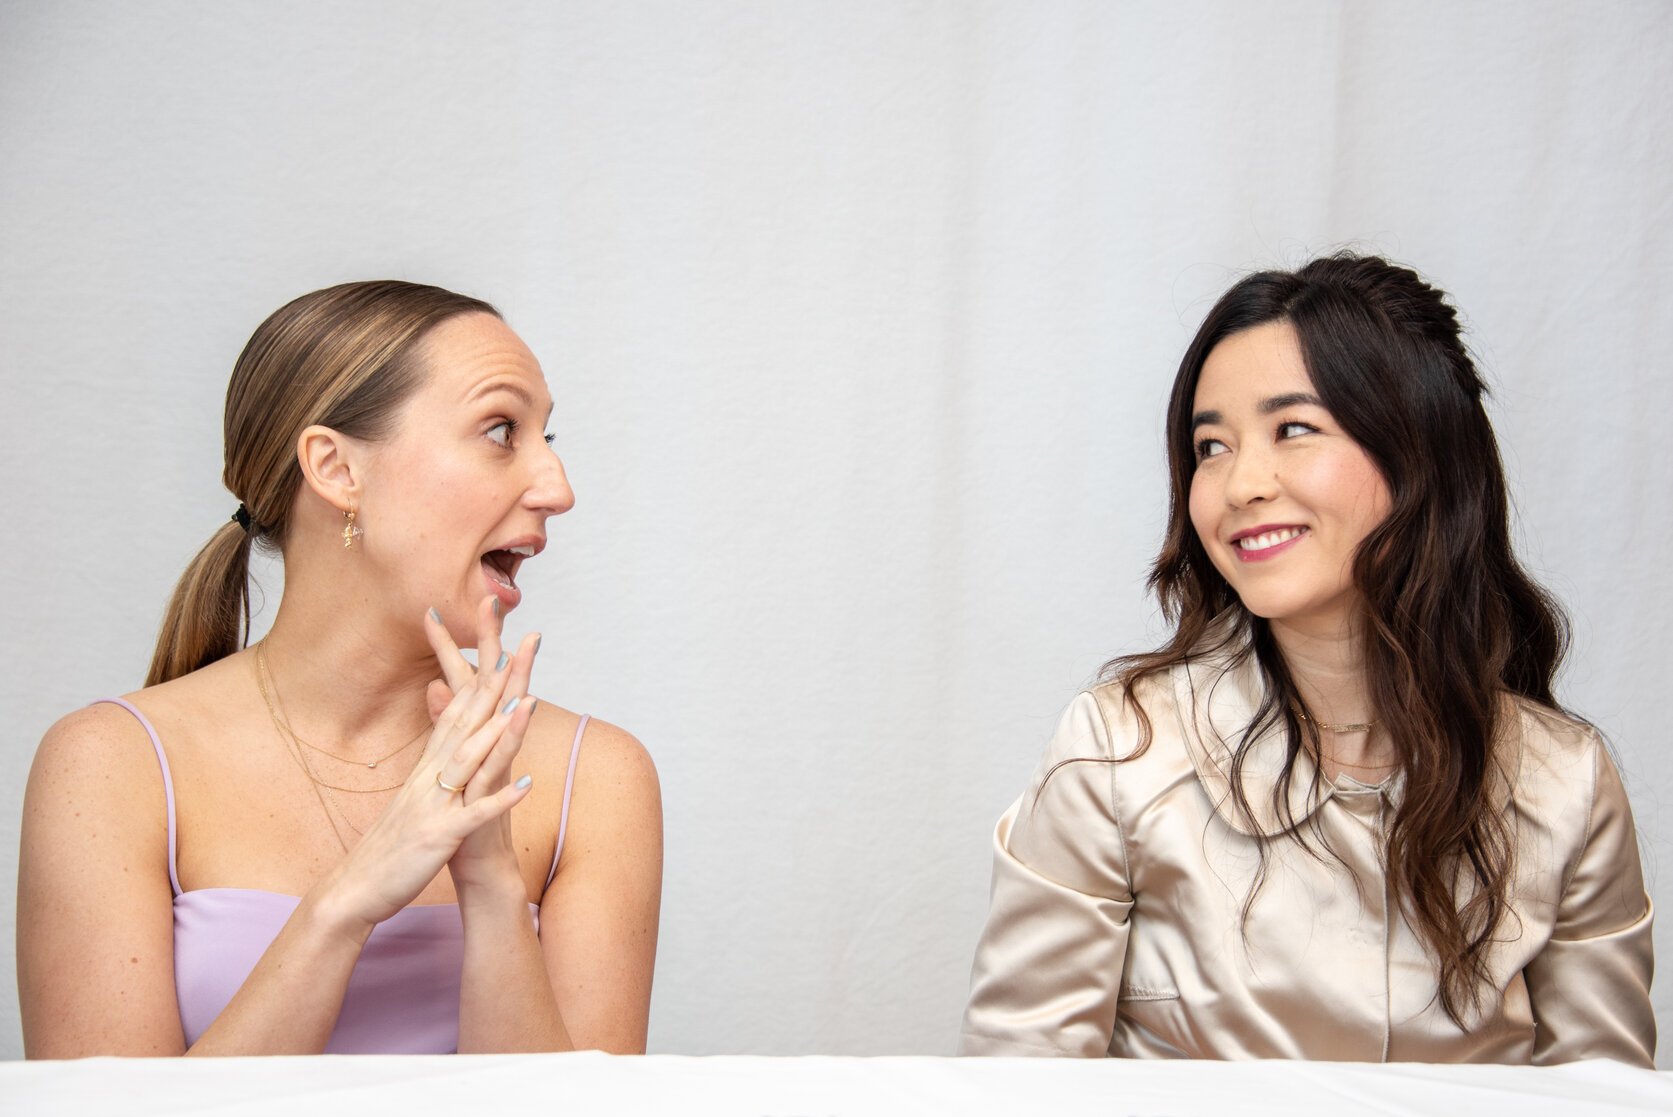 Anna Konkle and Maya Erskine at the "PEN15" Press Conference at The London Hotel